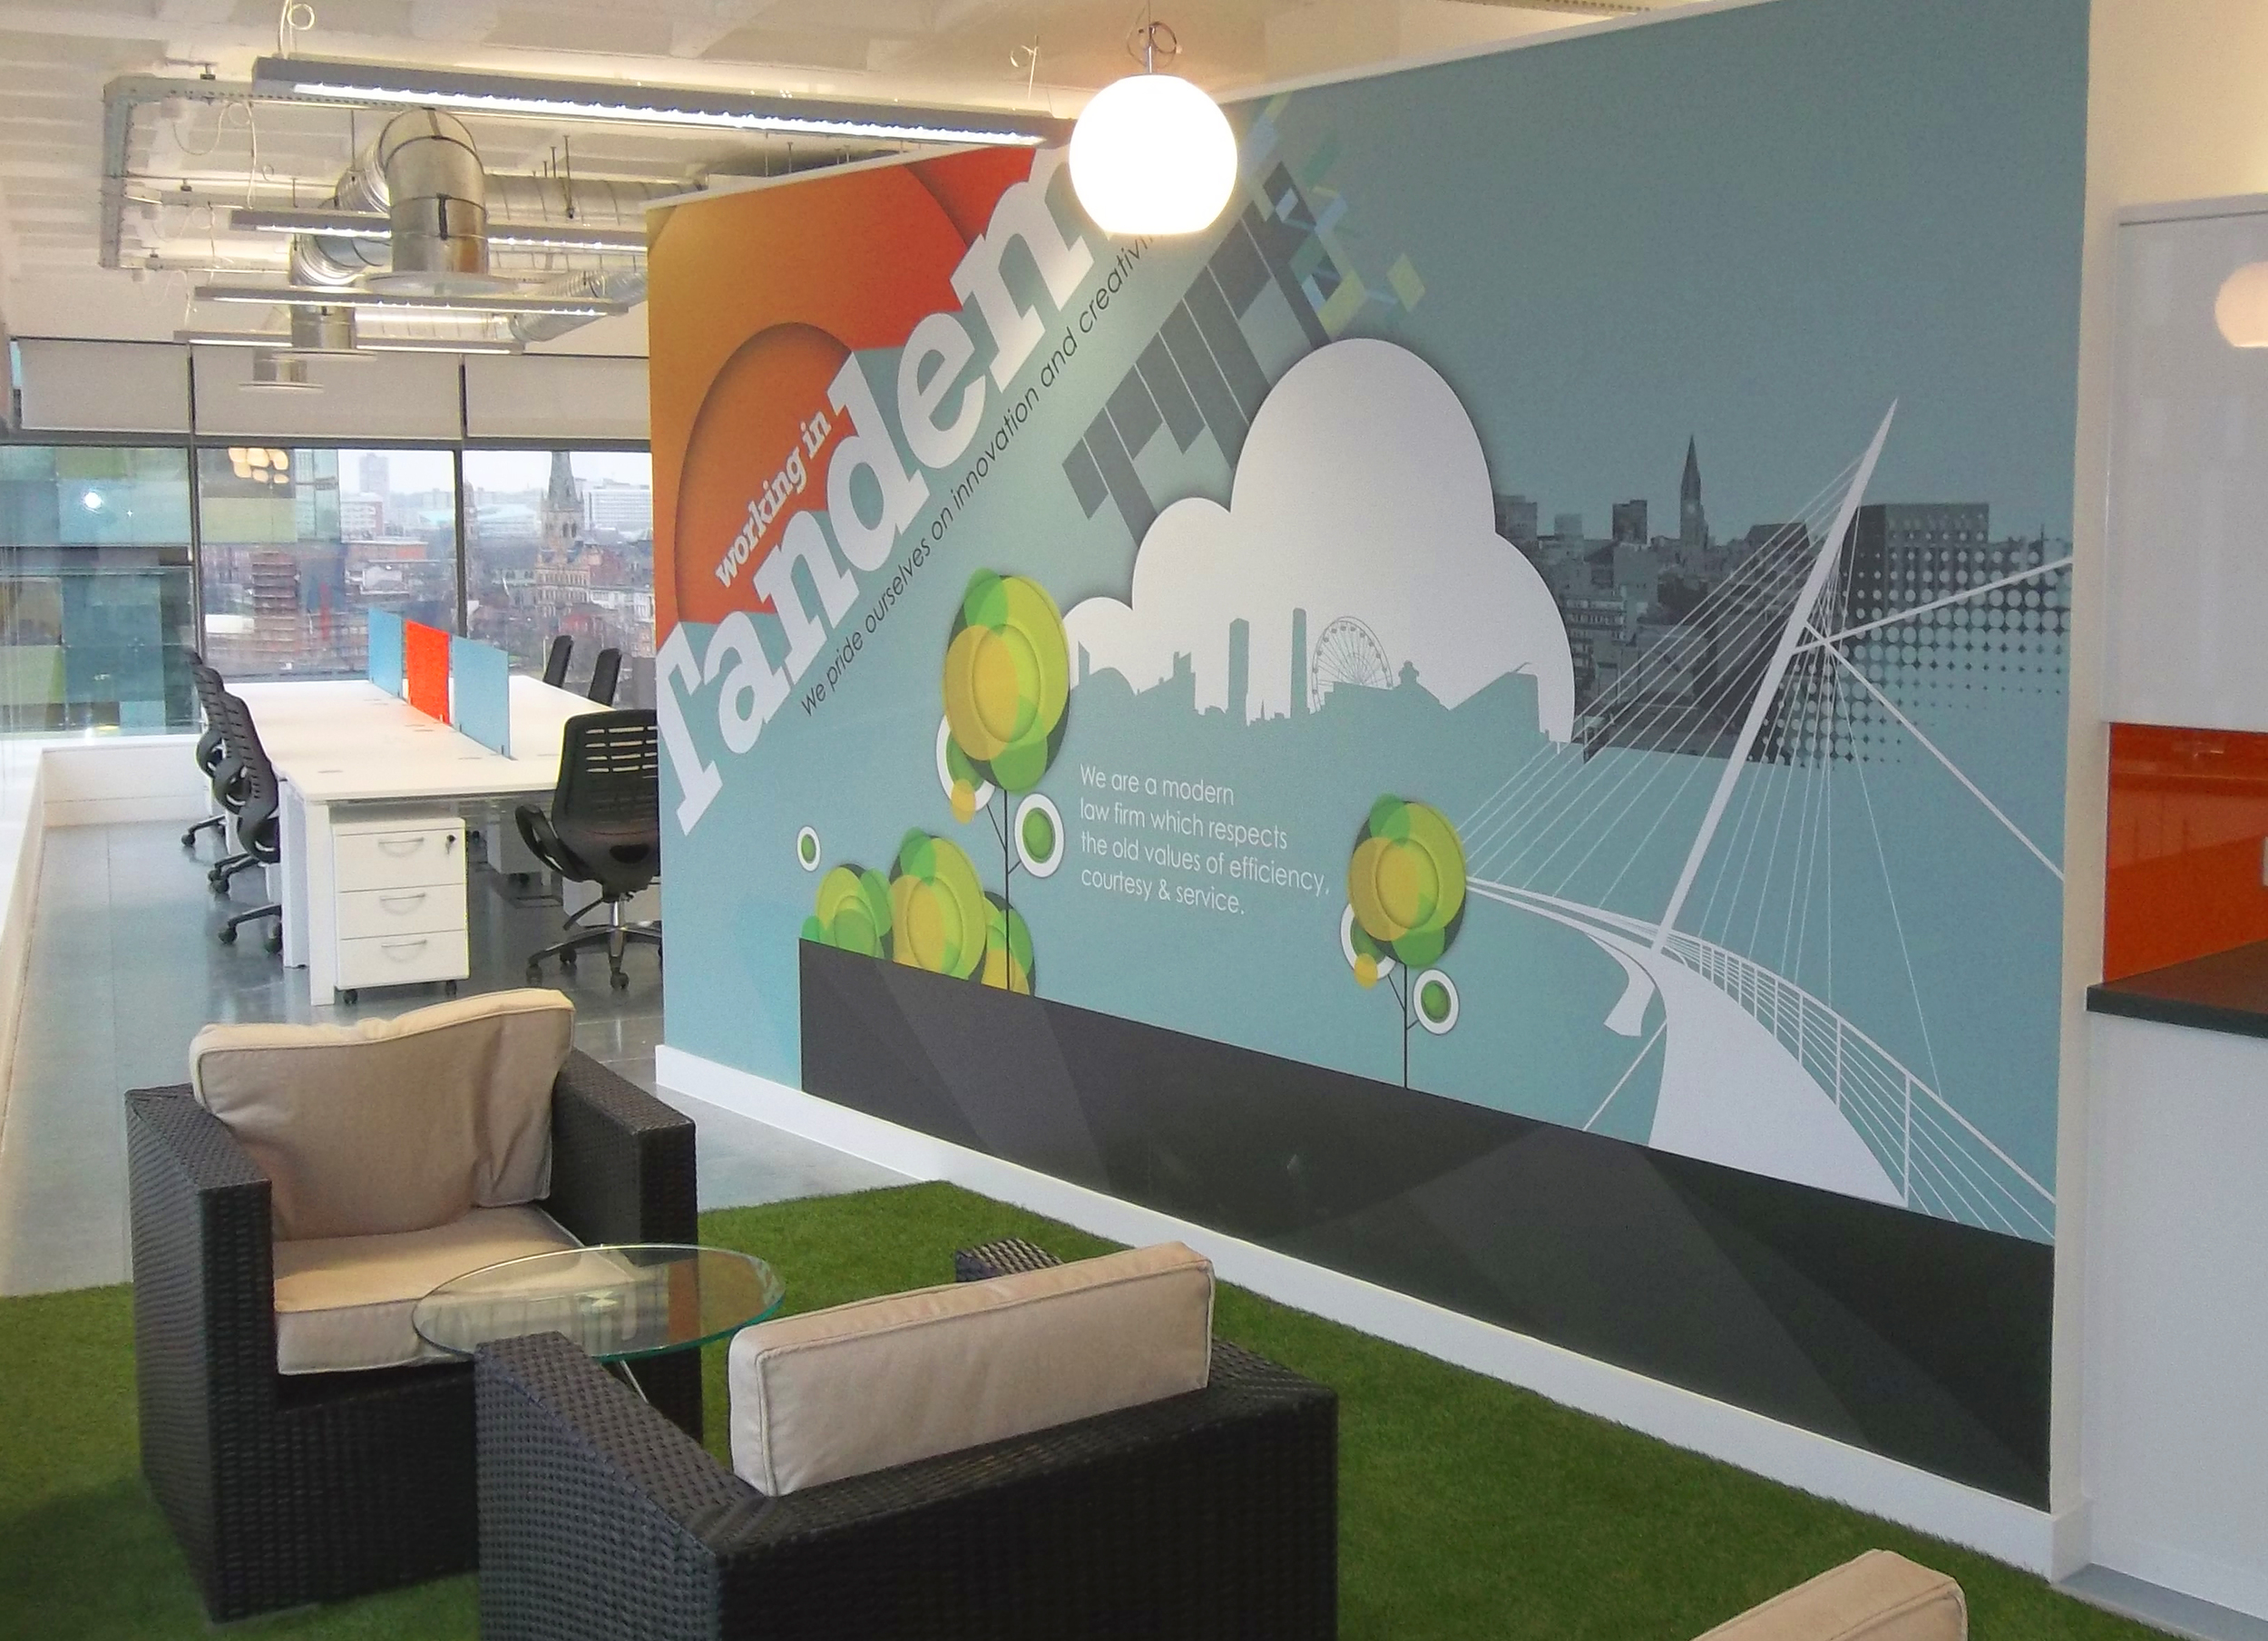 Tandem - Office wall logo and graphics